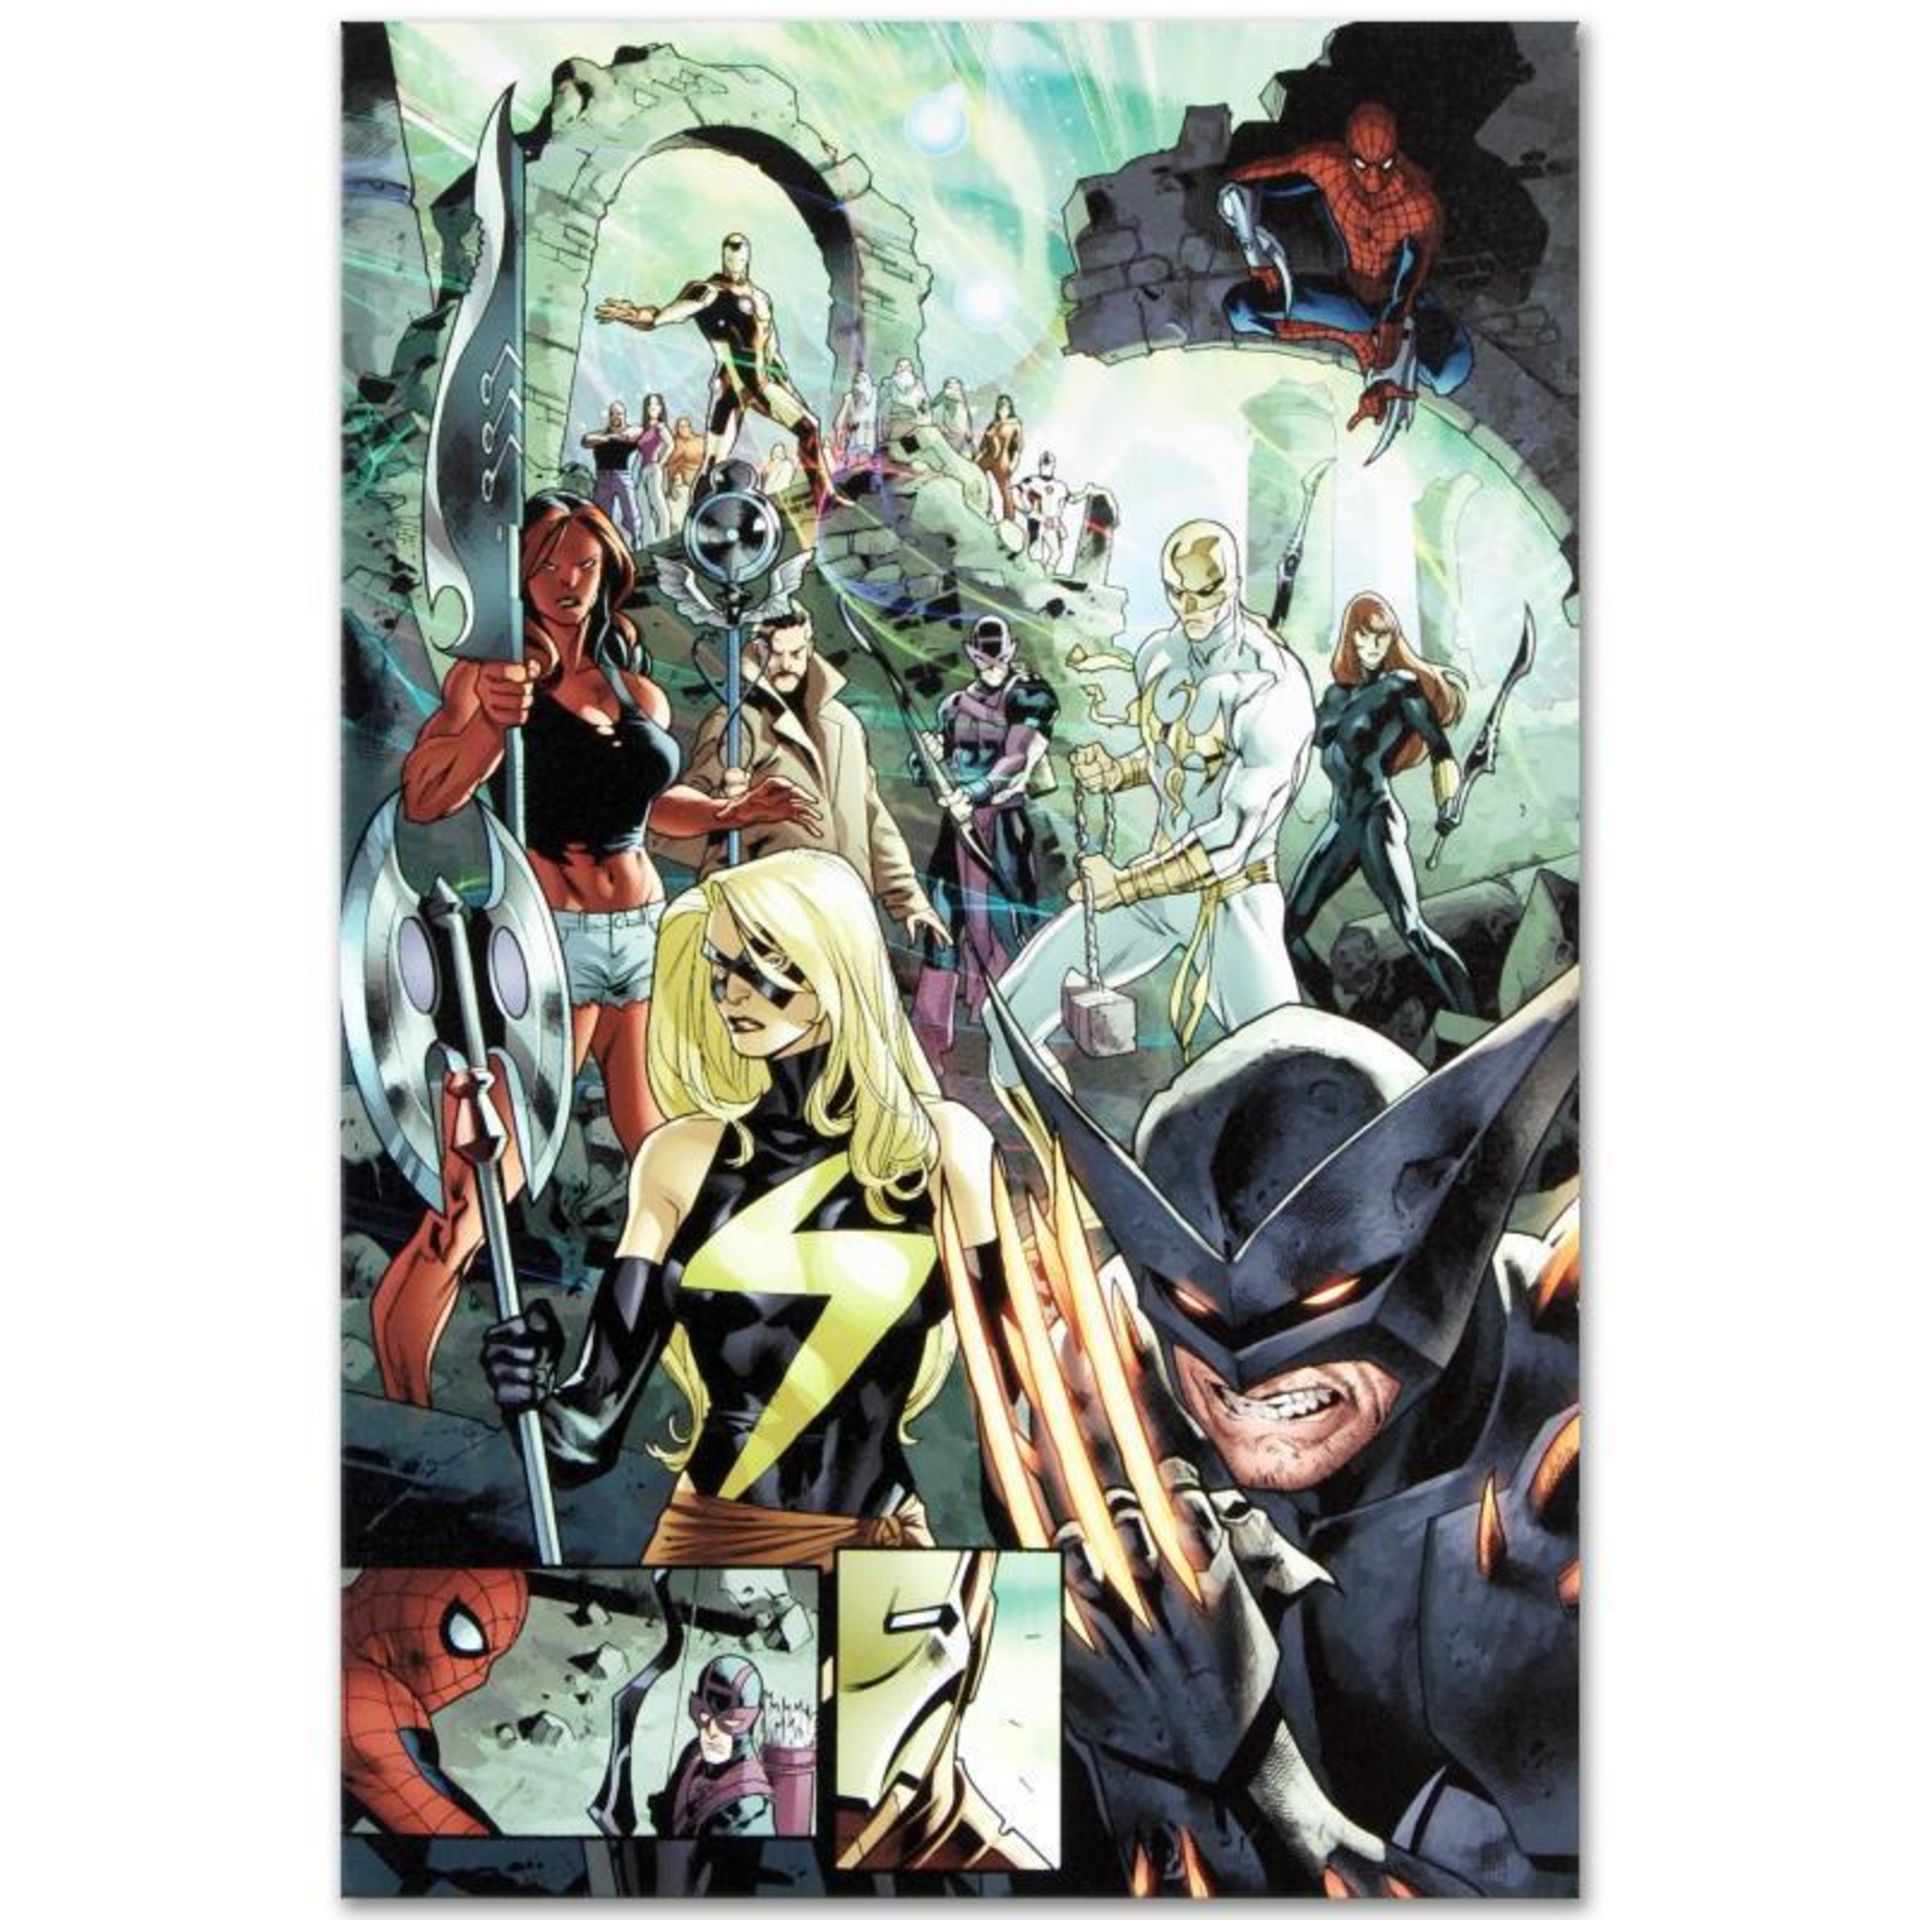 Marvel Comics "Fear Itself #7" Numbered Limited Edition Giclee on Canvas by Stua